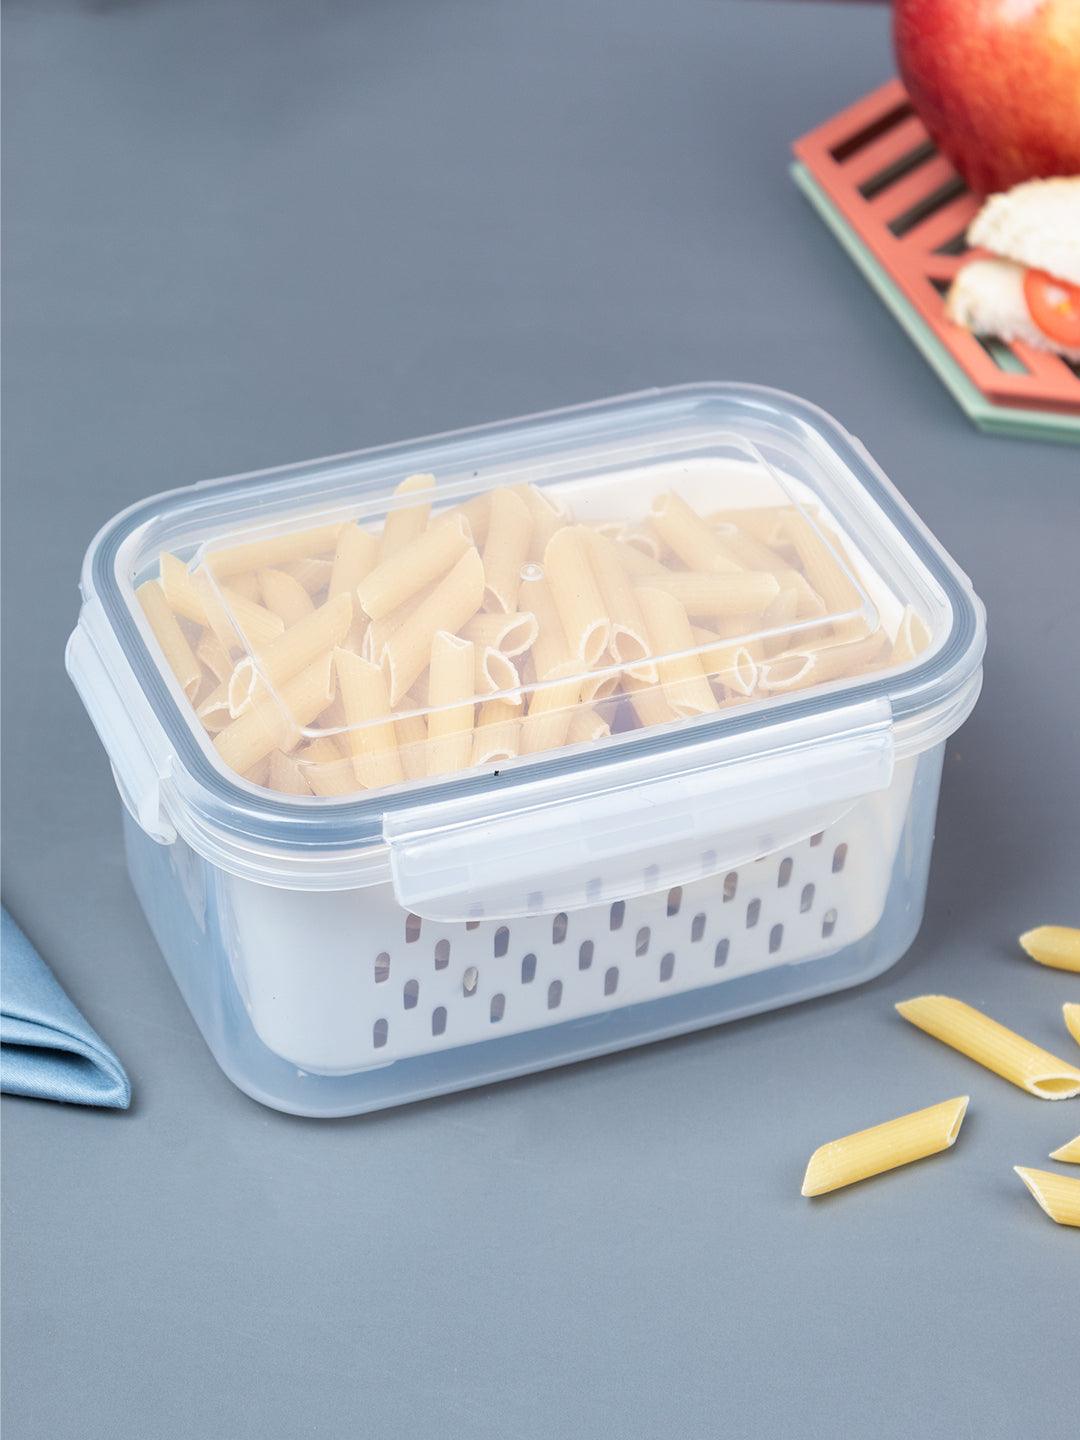 Kitchen Food Storage Containers - 1700ml, Plastic